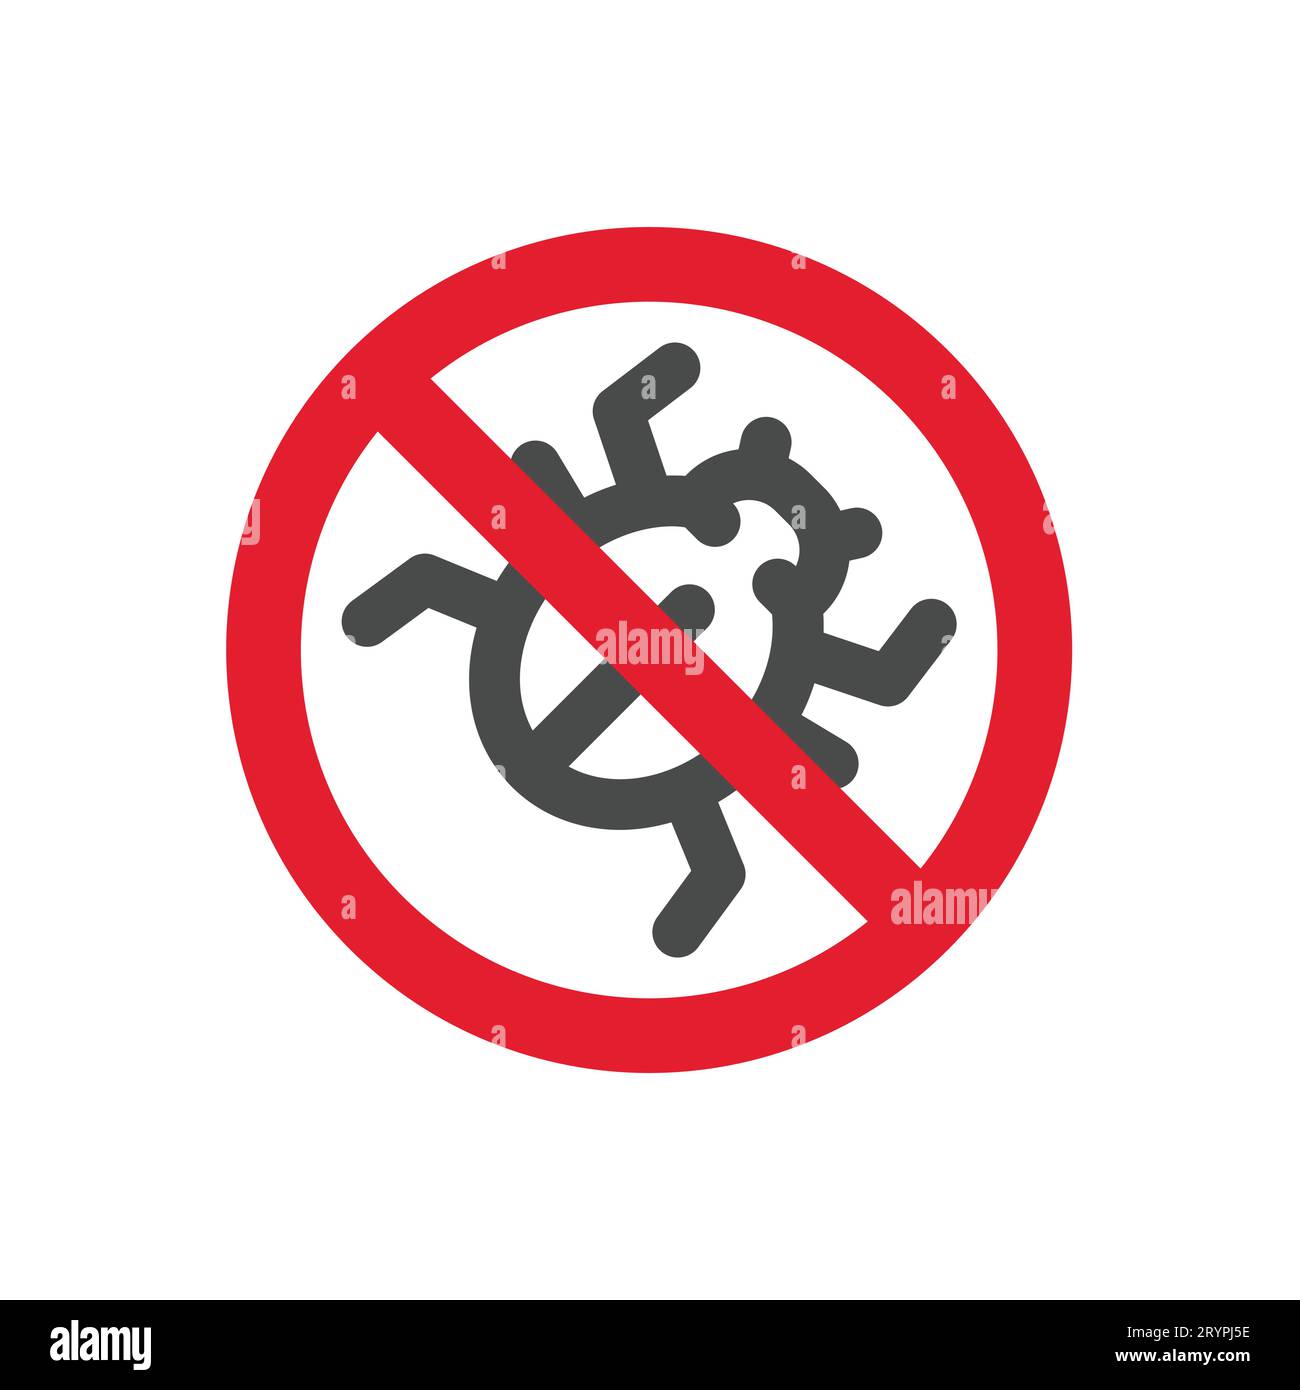 No bug red prohibition sign. Insecticide repellent or pesticide, no bugs icon. Stock Vector